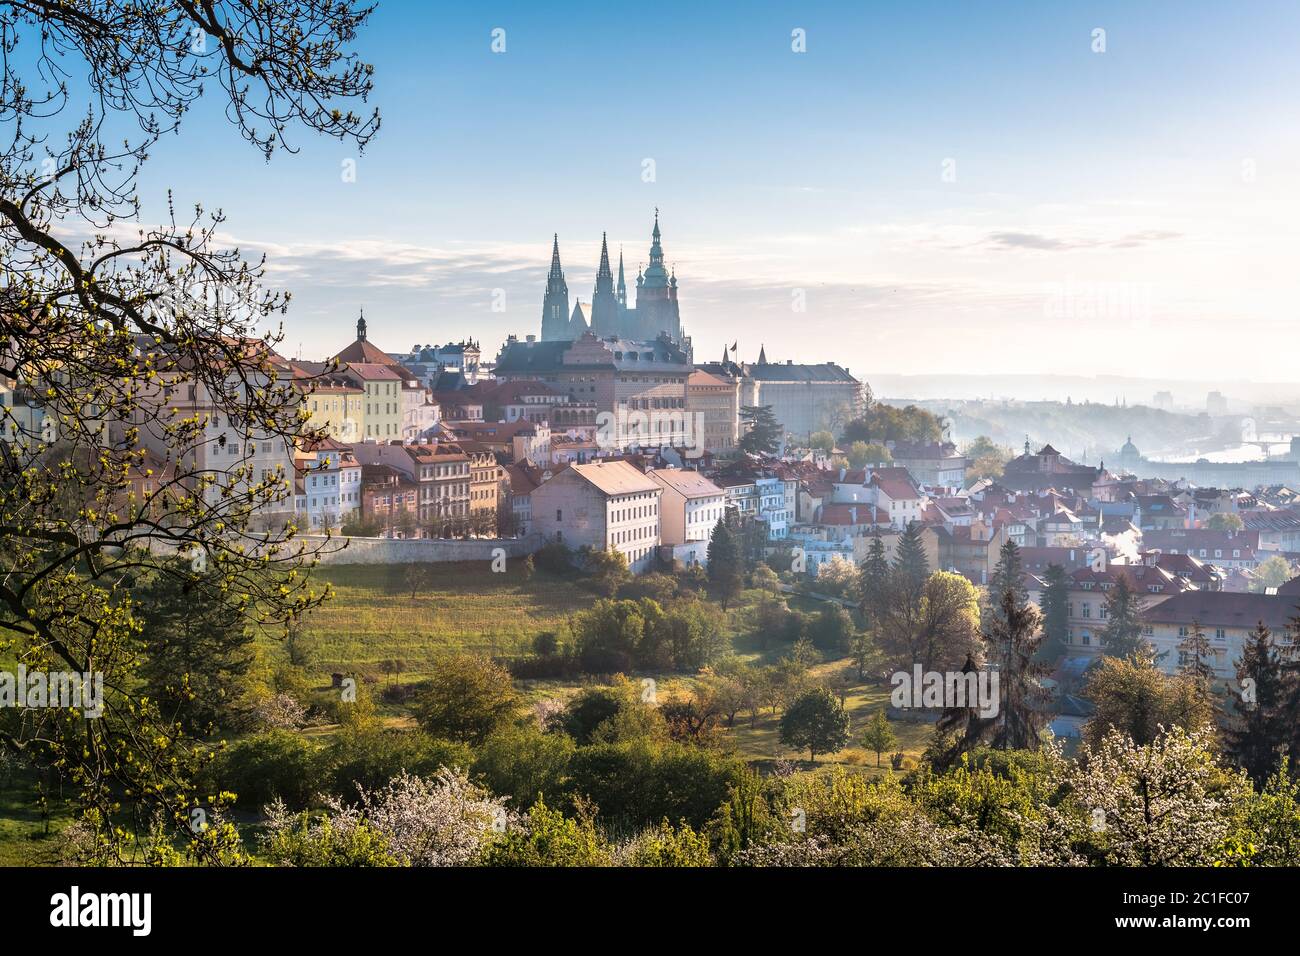 Prague Castle, St. Vitus cathedral and the UNESCO heritage site of the old city center with red rooftops captured behind blooming apple orchard from S Stock Photo